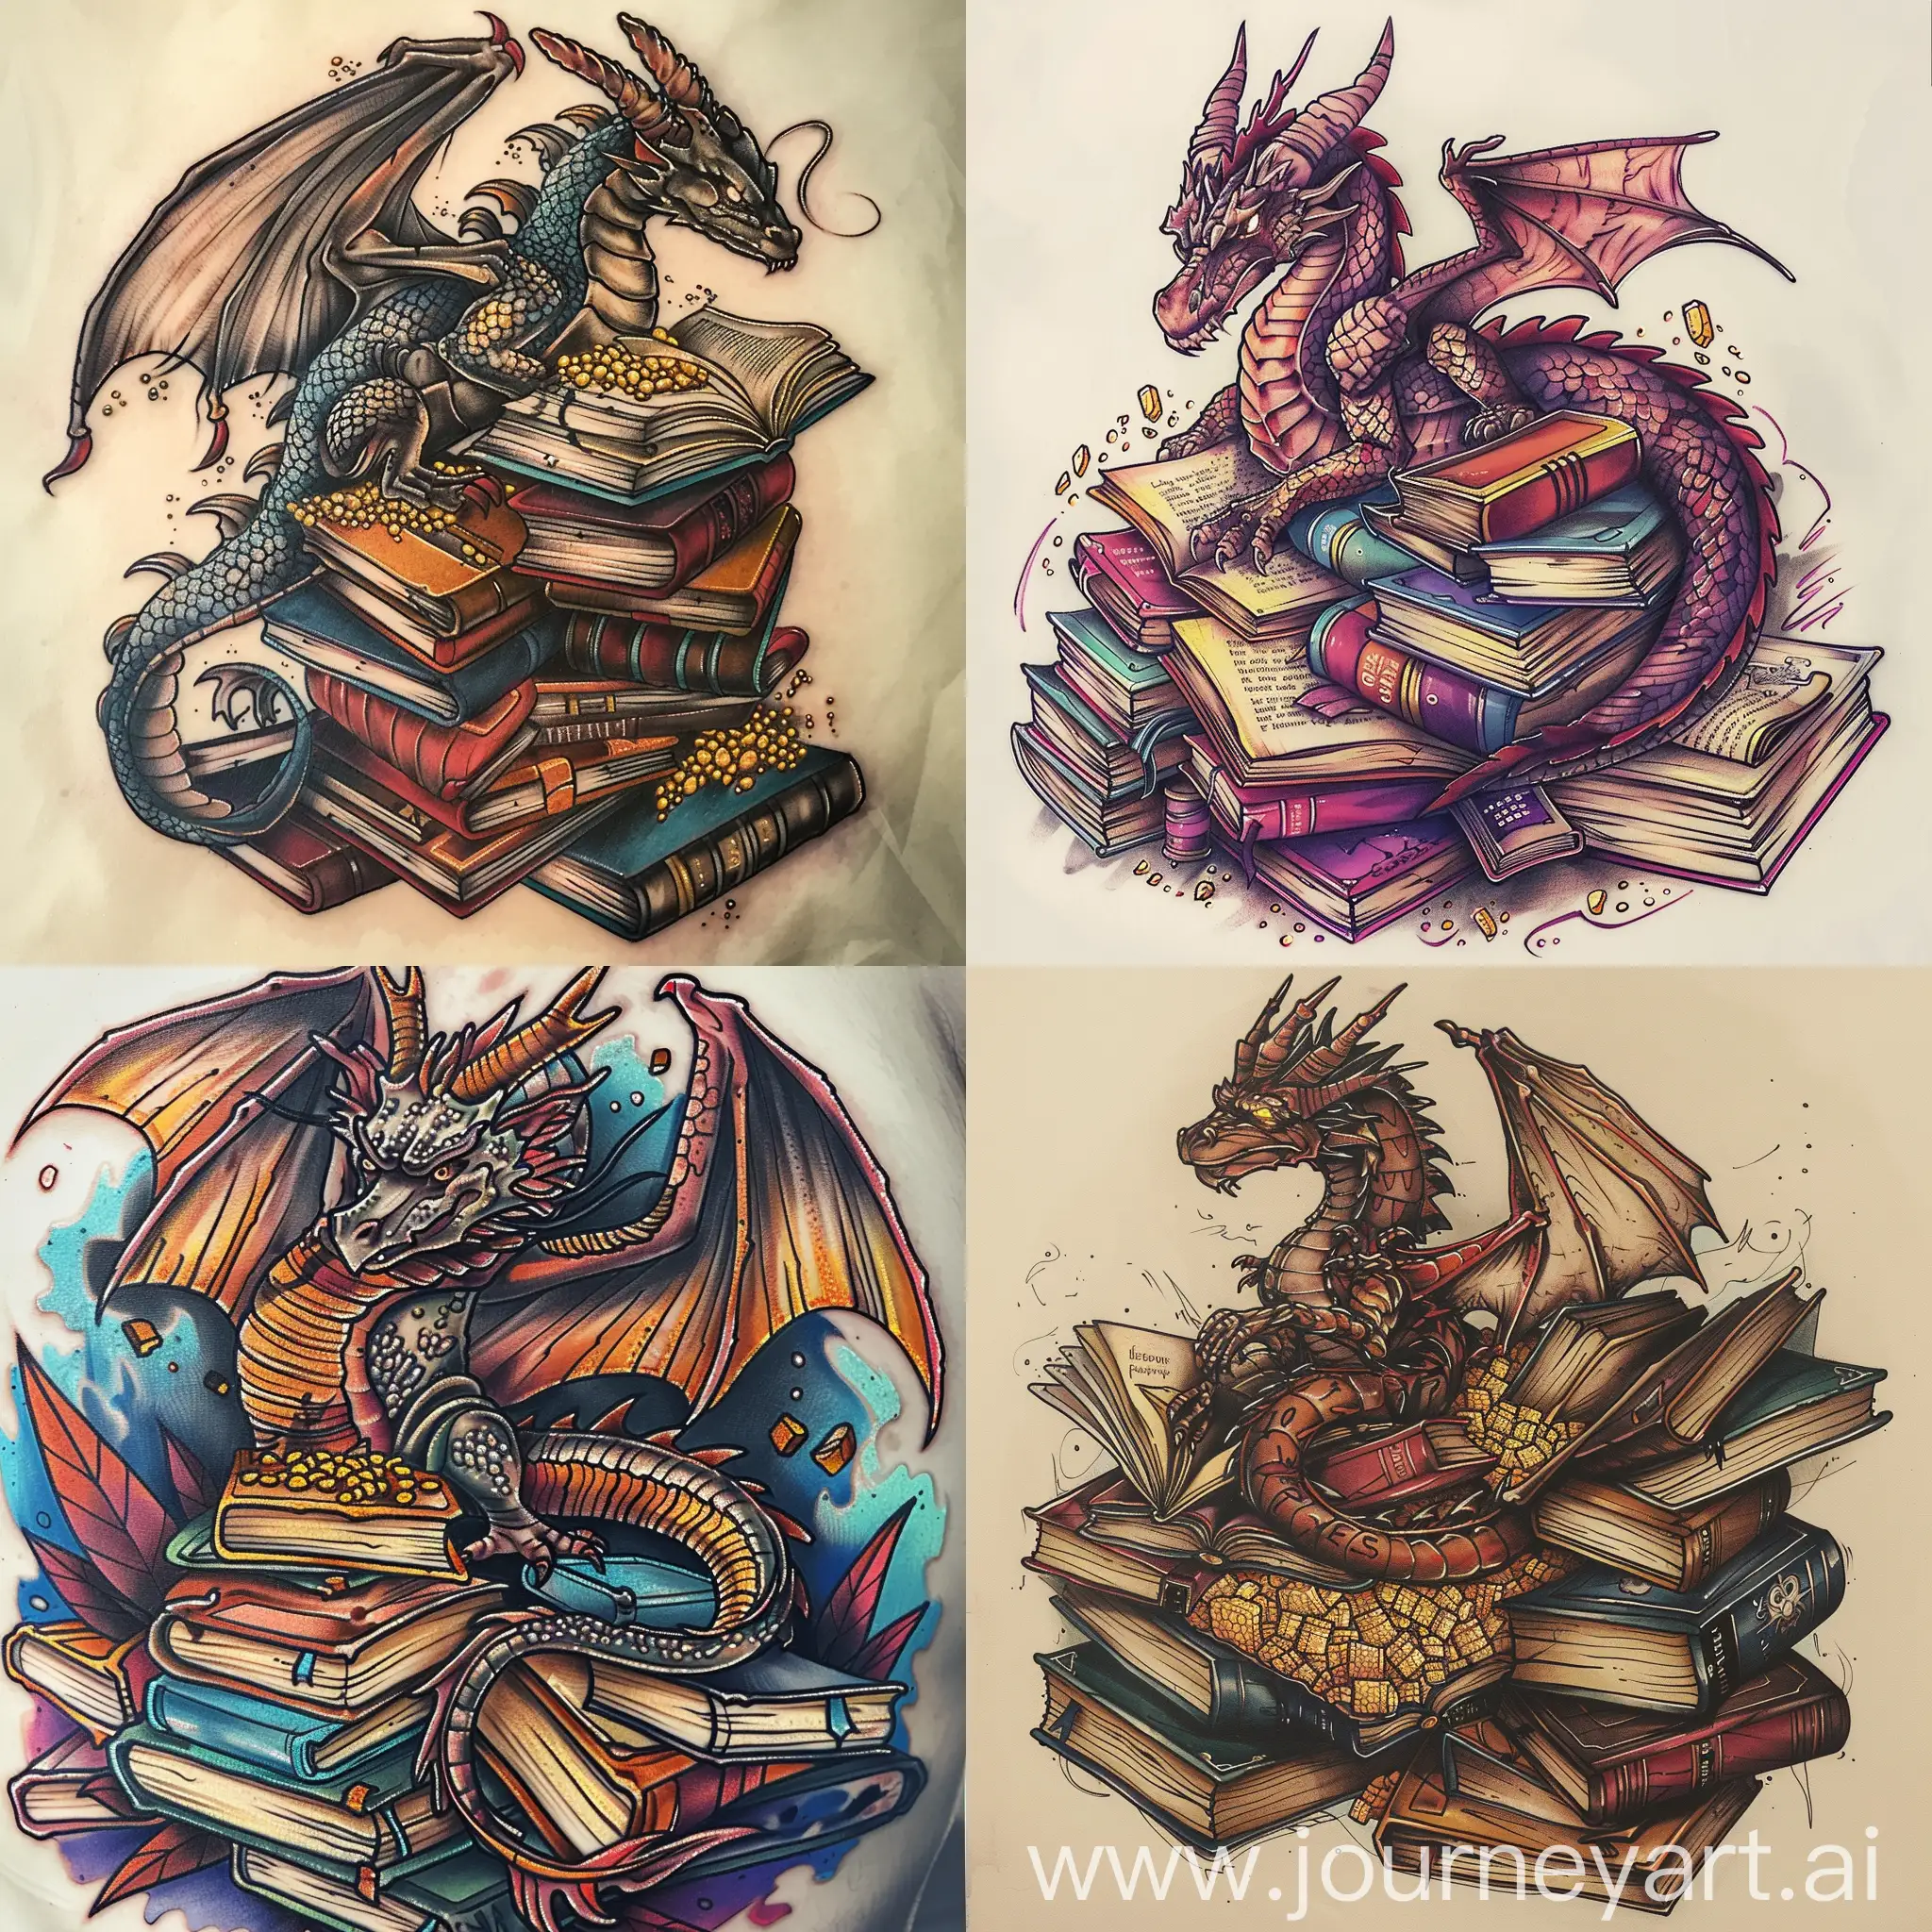 A detailed and colorful tattoo design of a dragon perched on a pile of books instead of a pile of gold. The dragon is in a coiled position with its tail wrapped around the books. The books should be in various sizes and colors, and some of them should be open with pages splayed out. The dragon should be facing the viewer, and its eyes should be glowing. The style of the tattoo should be realistic, but with a touch of fantasy.